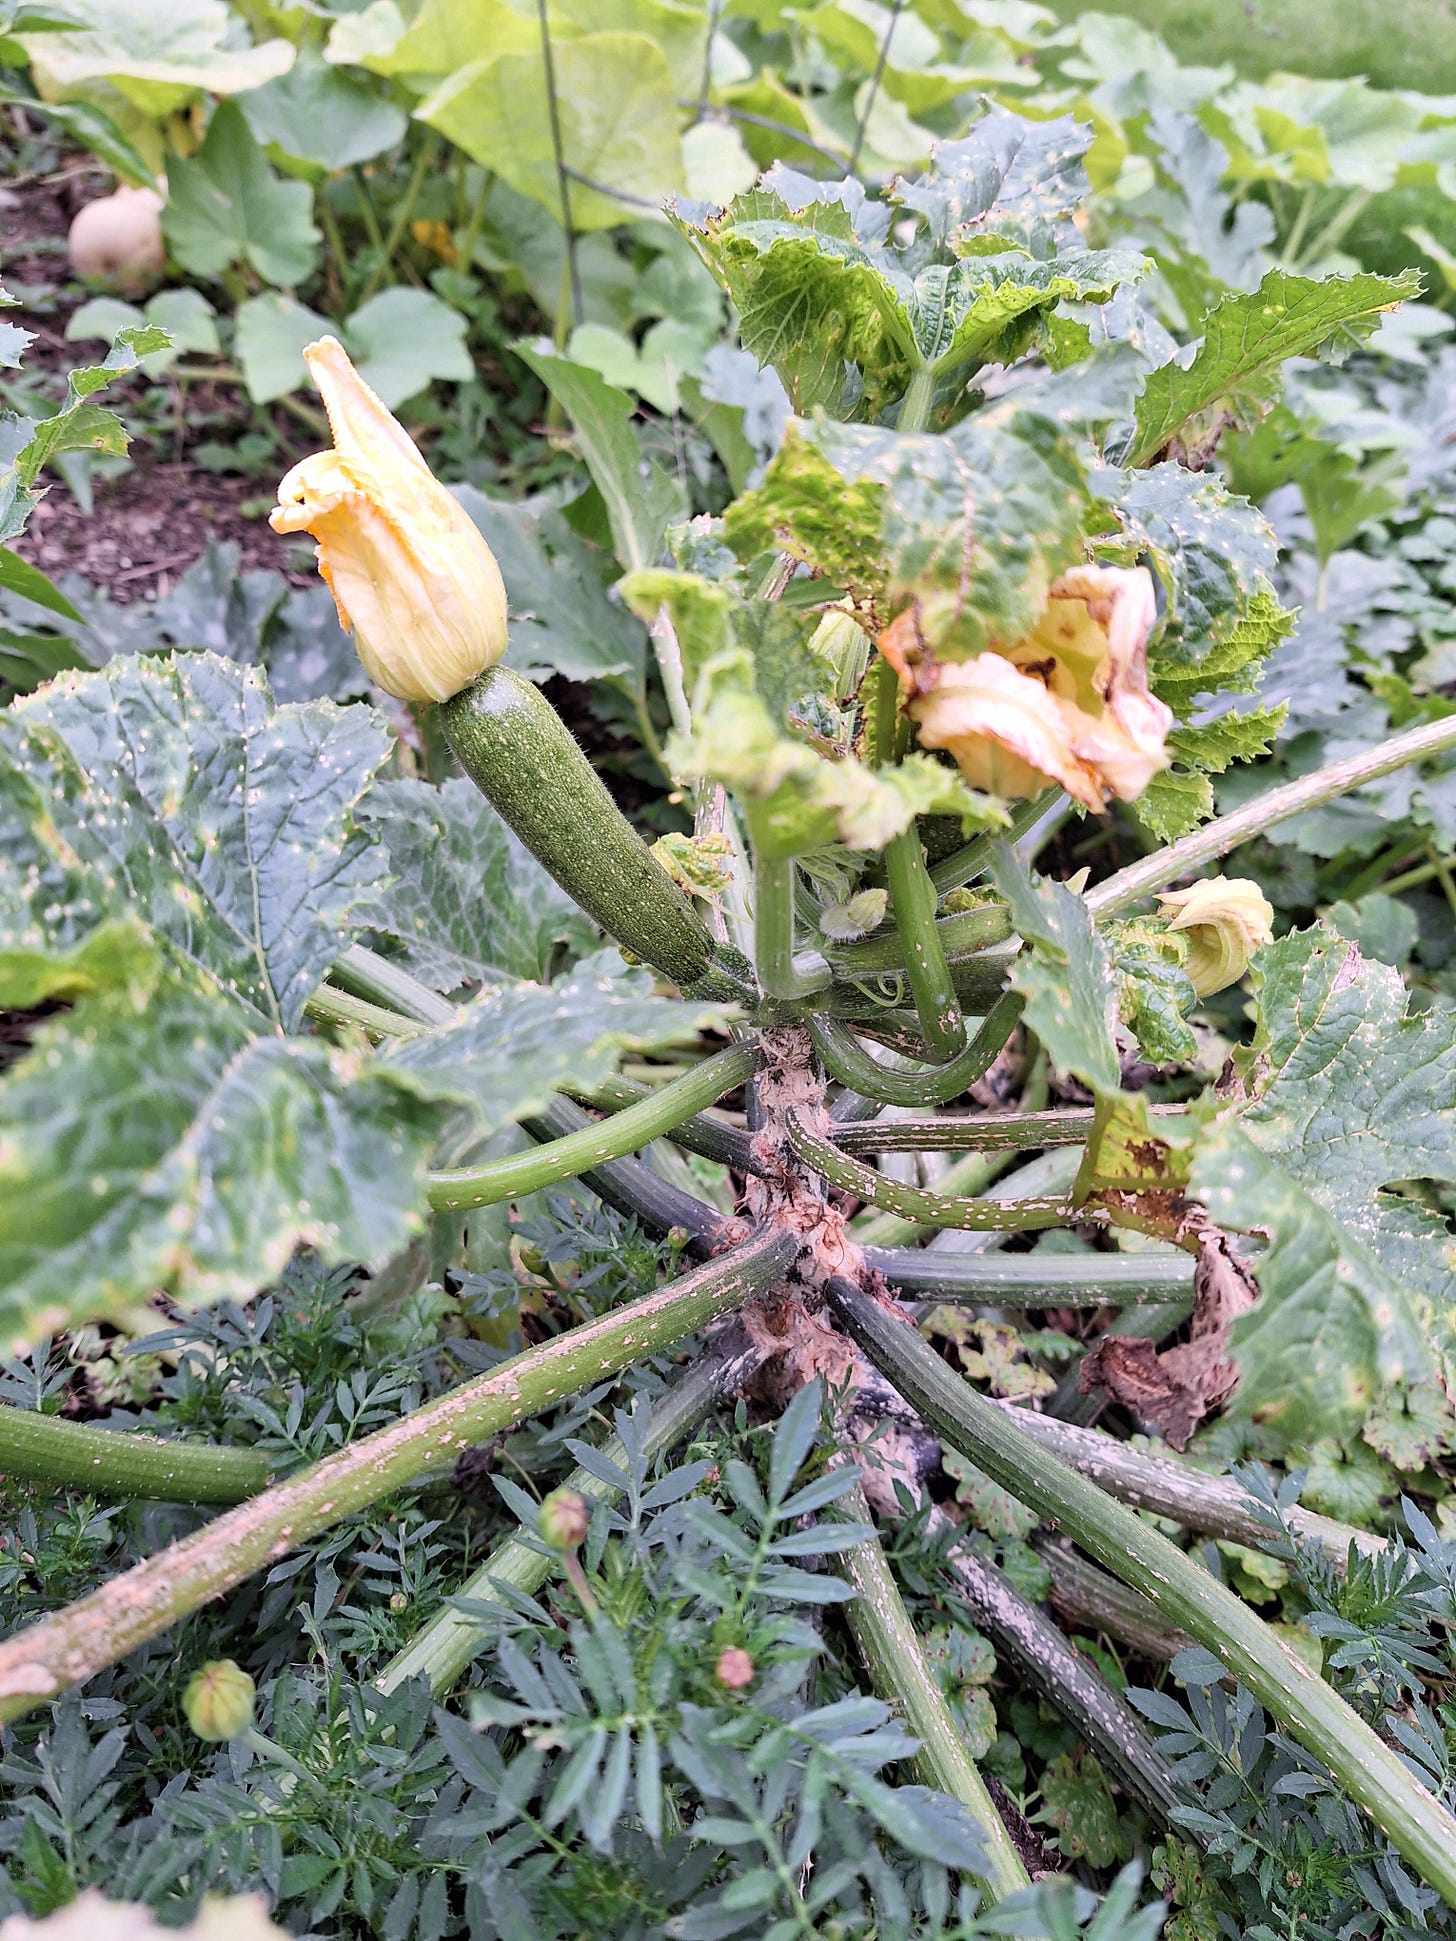 photo of my zucchini plant trying to create one more squash